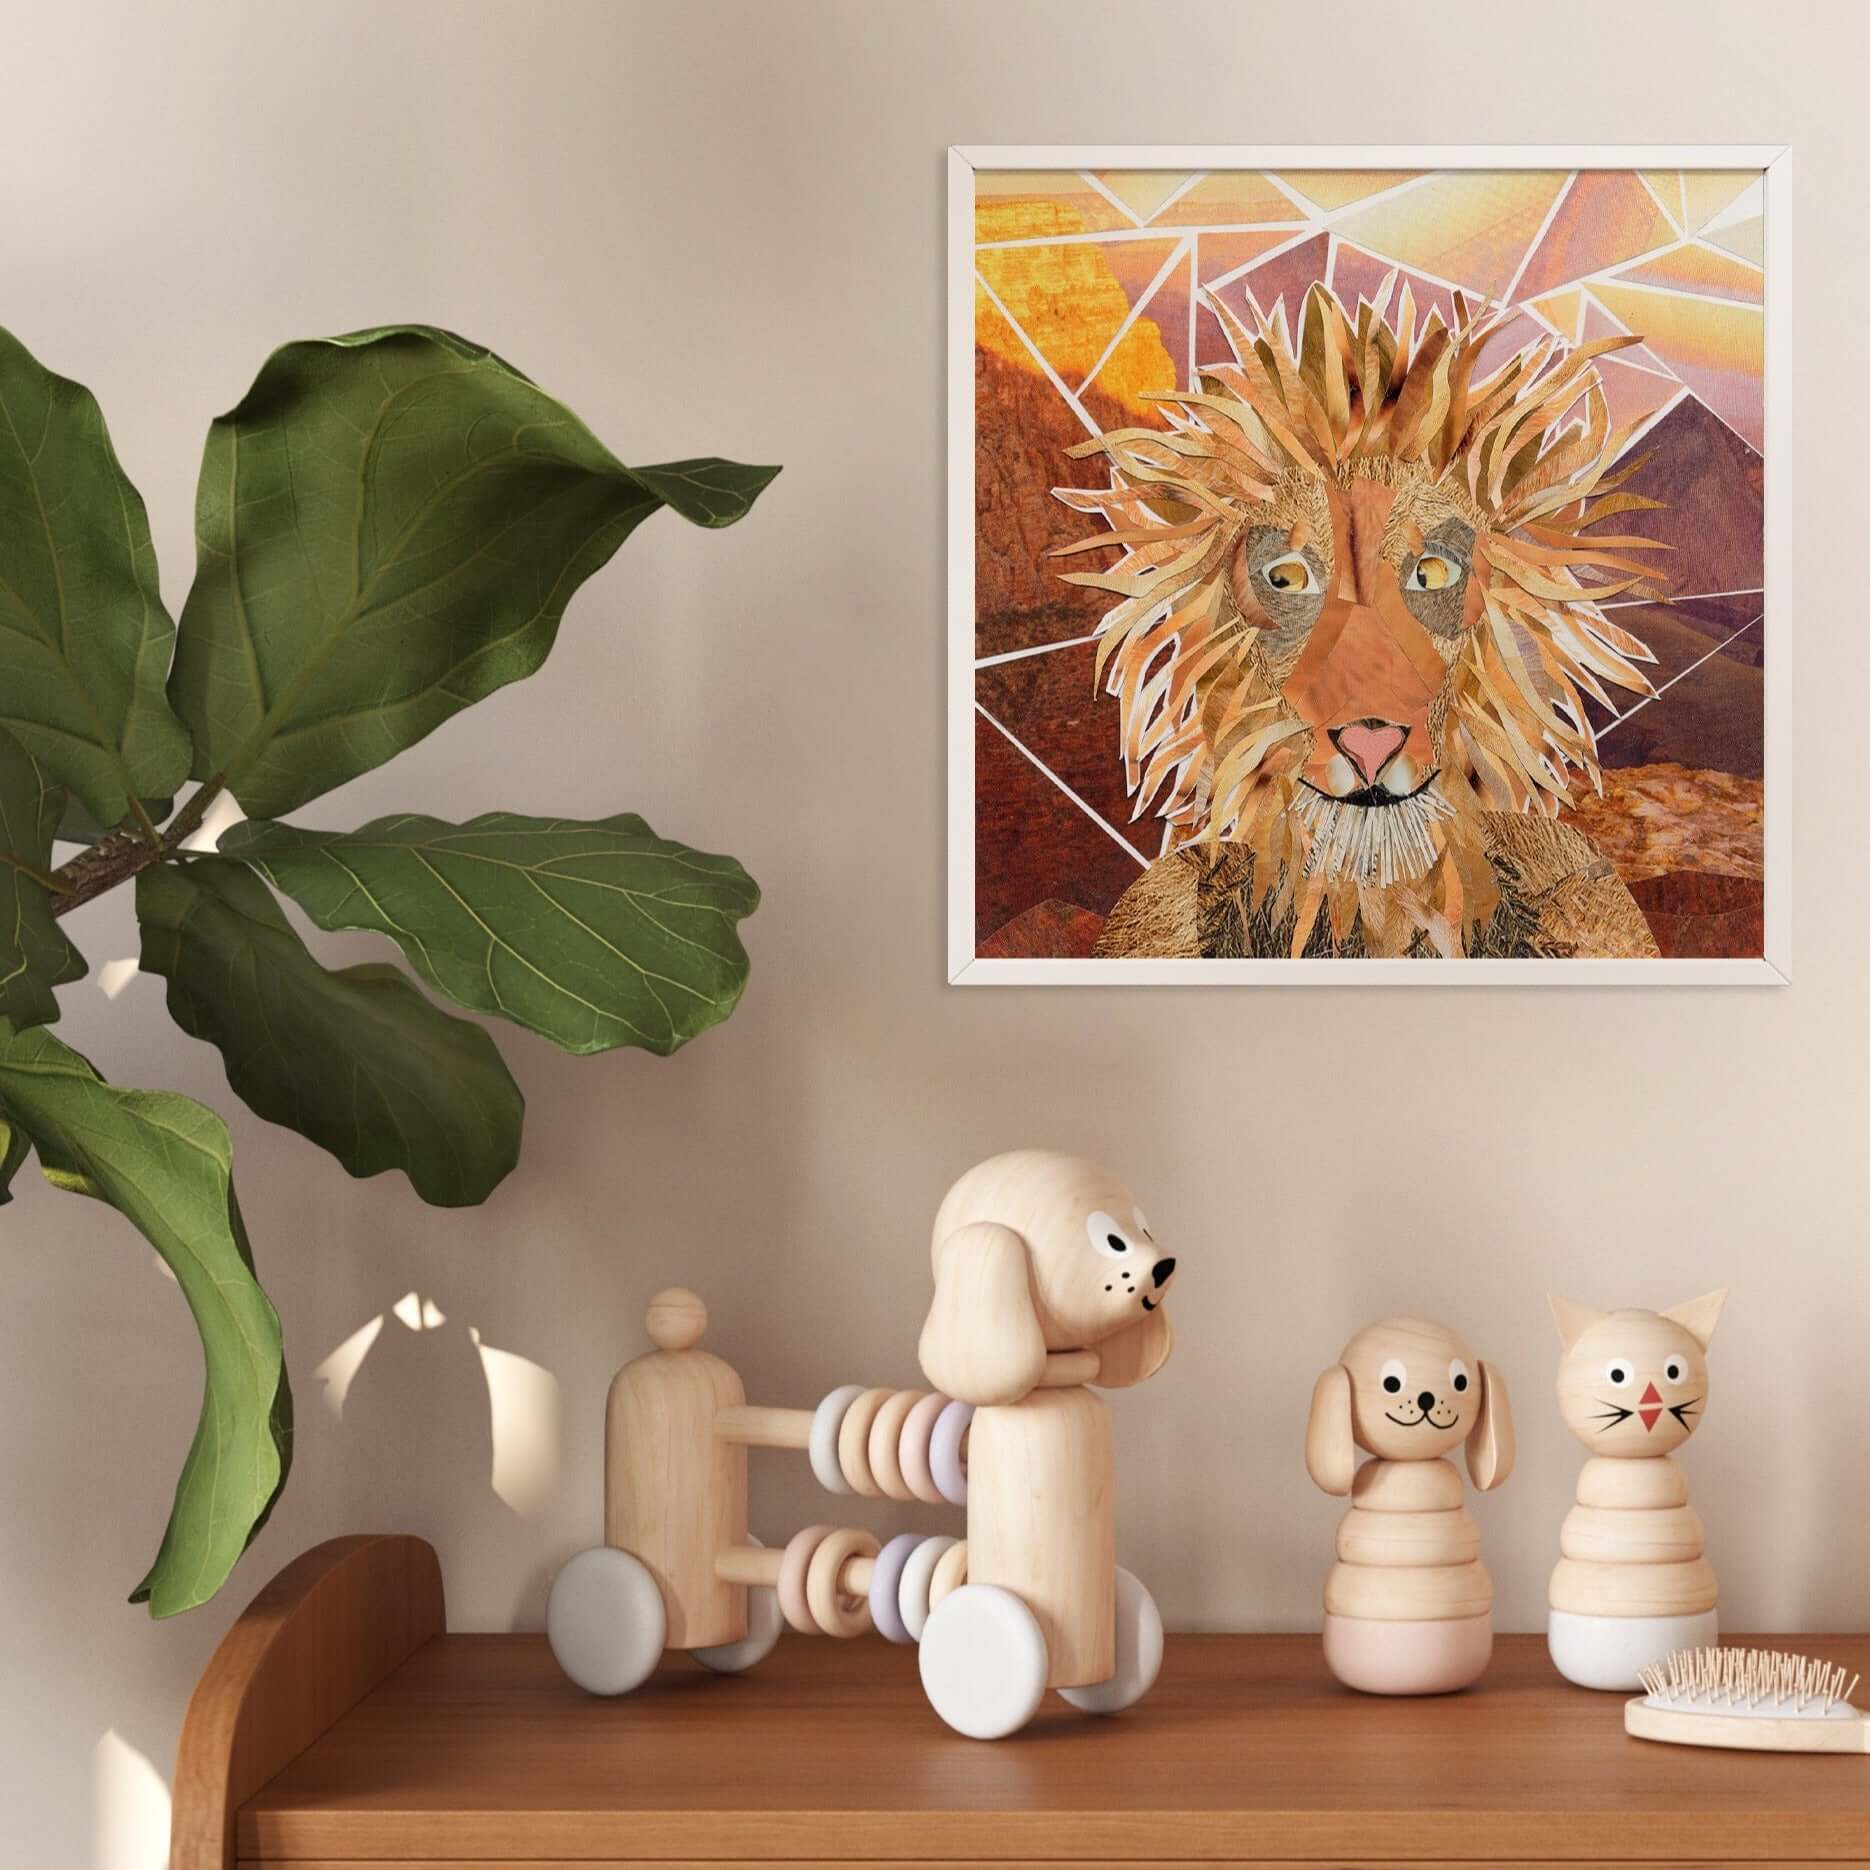 leo wall art, more the merrlier collage art square print